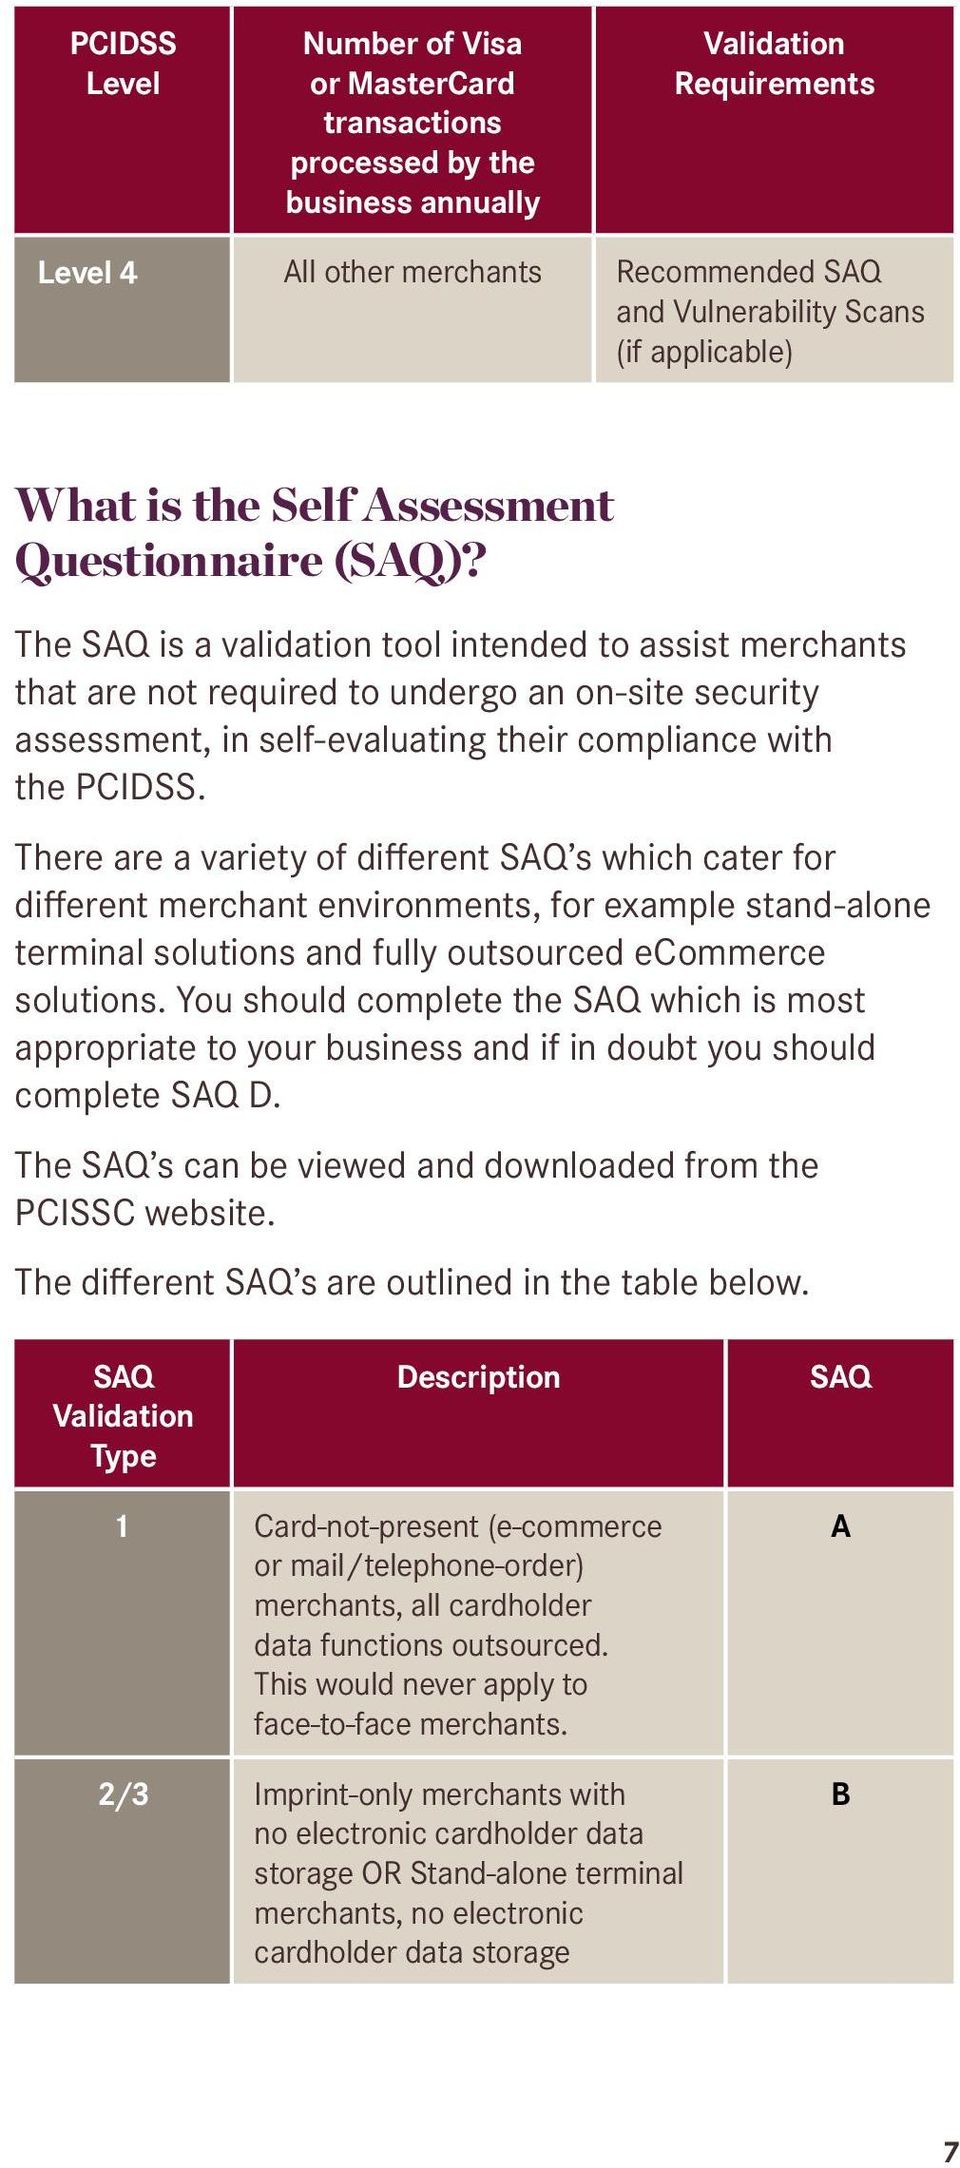 The SAQ is a validation tool intended to assist merchants that are not required to undergo an on-site security assessment, in self-evaluating their compliance with the PCIDSS.